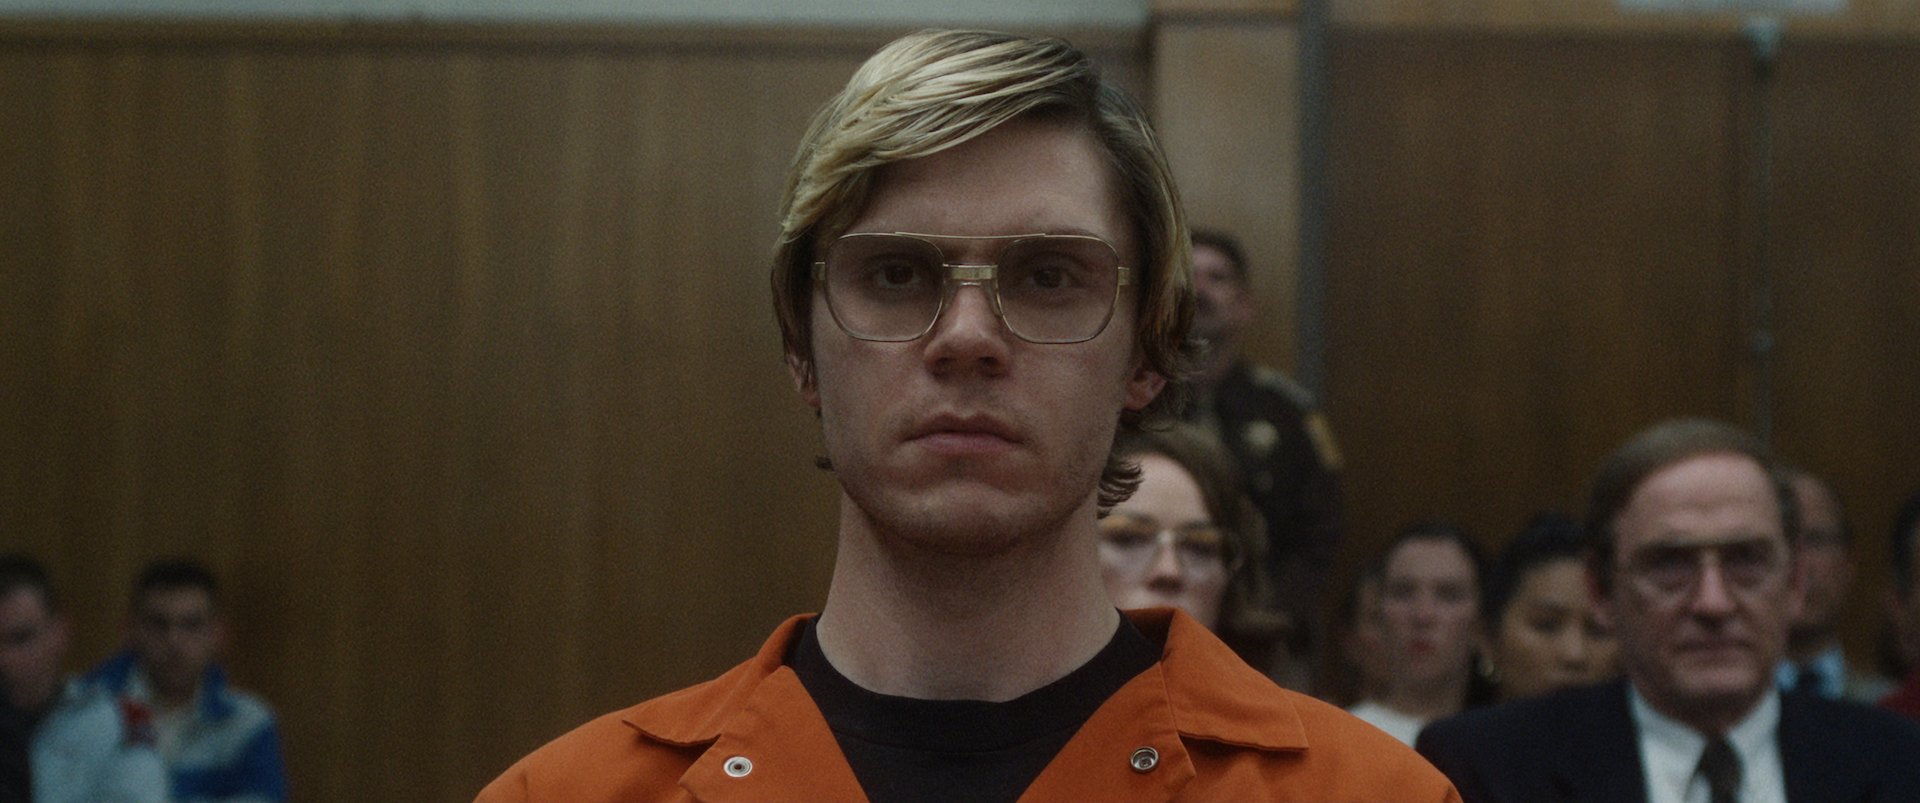 The details of the ‘The Jeffrey Dahmer Story’ trailer are too disturbing for a headline